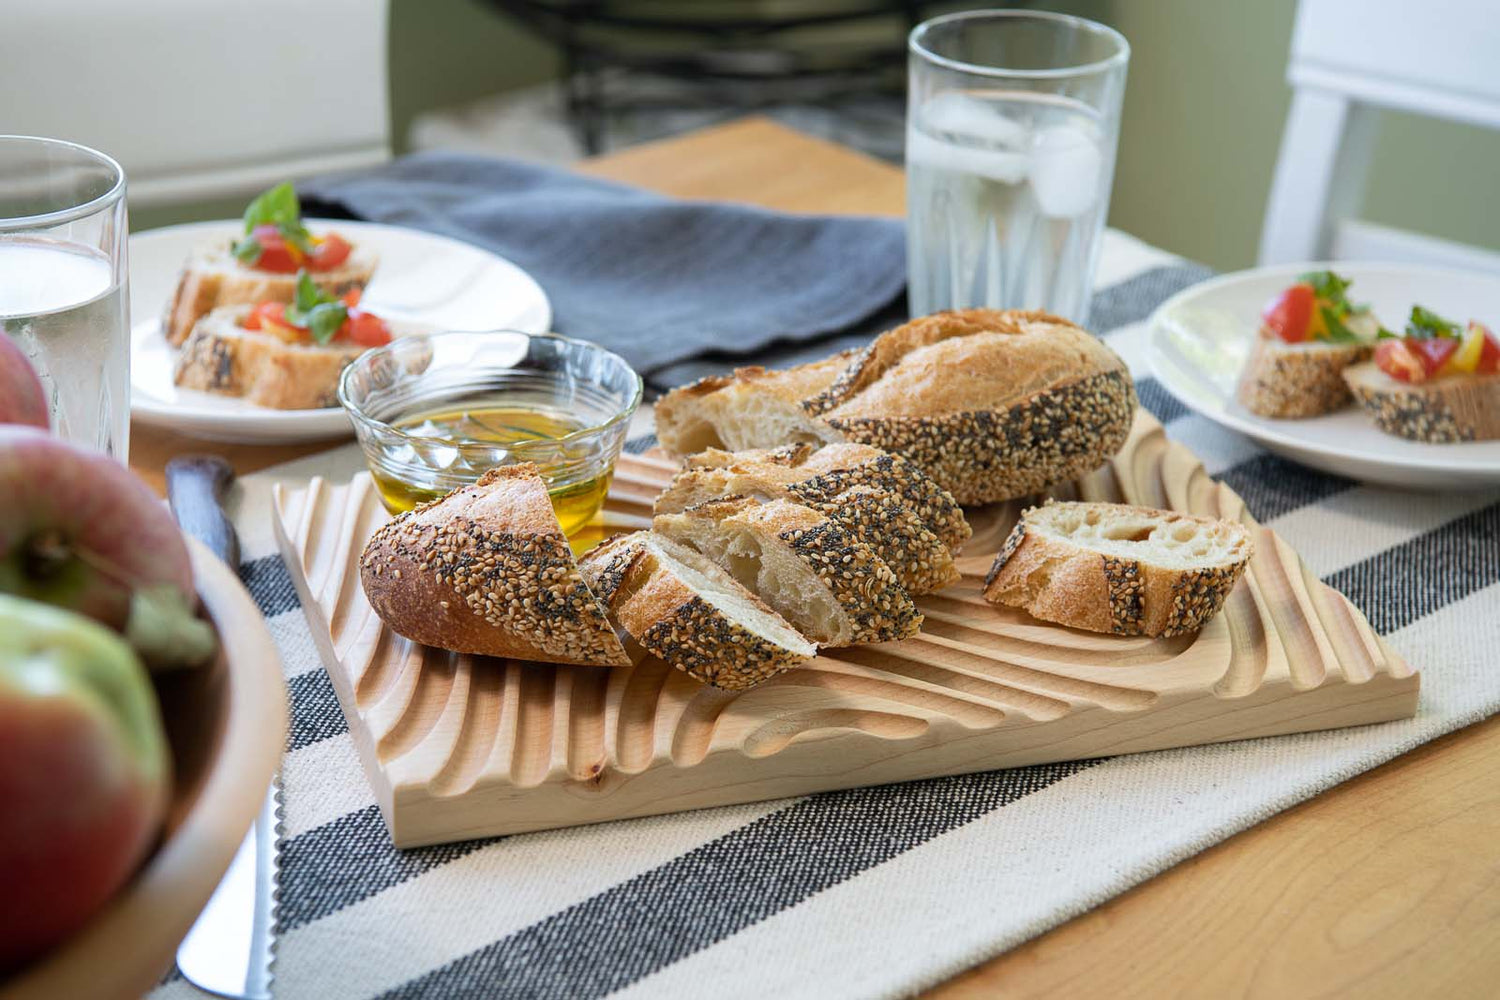 Crafted from sustainable & locally sourced Maple hardwood, these cutting boards completely support the bread, but have deep grooves to catch crumbs. 